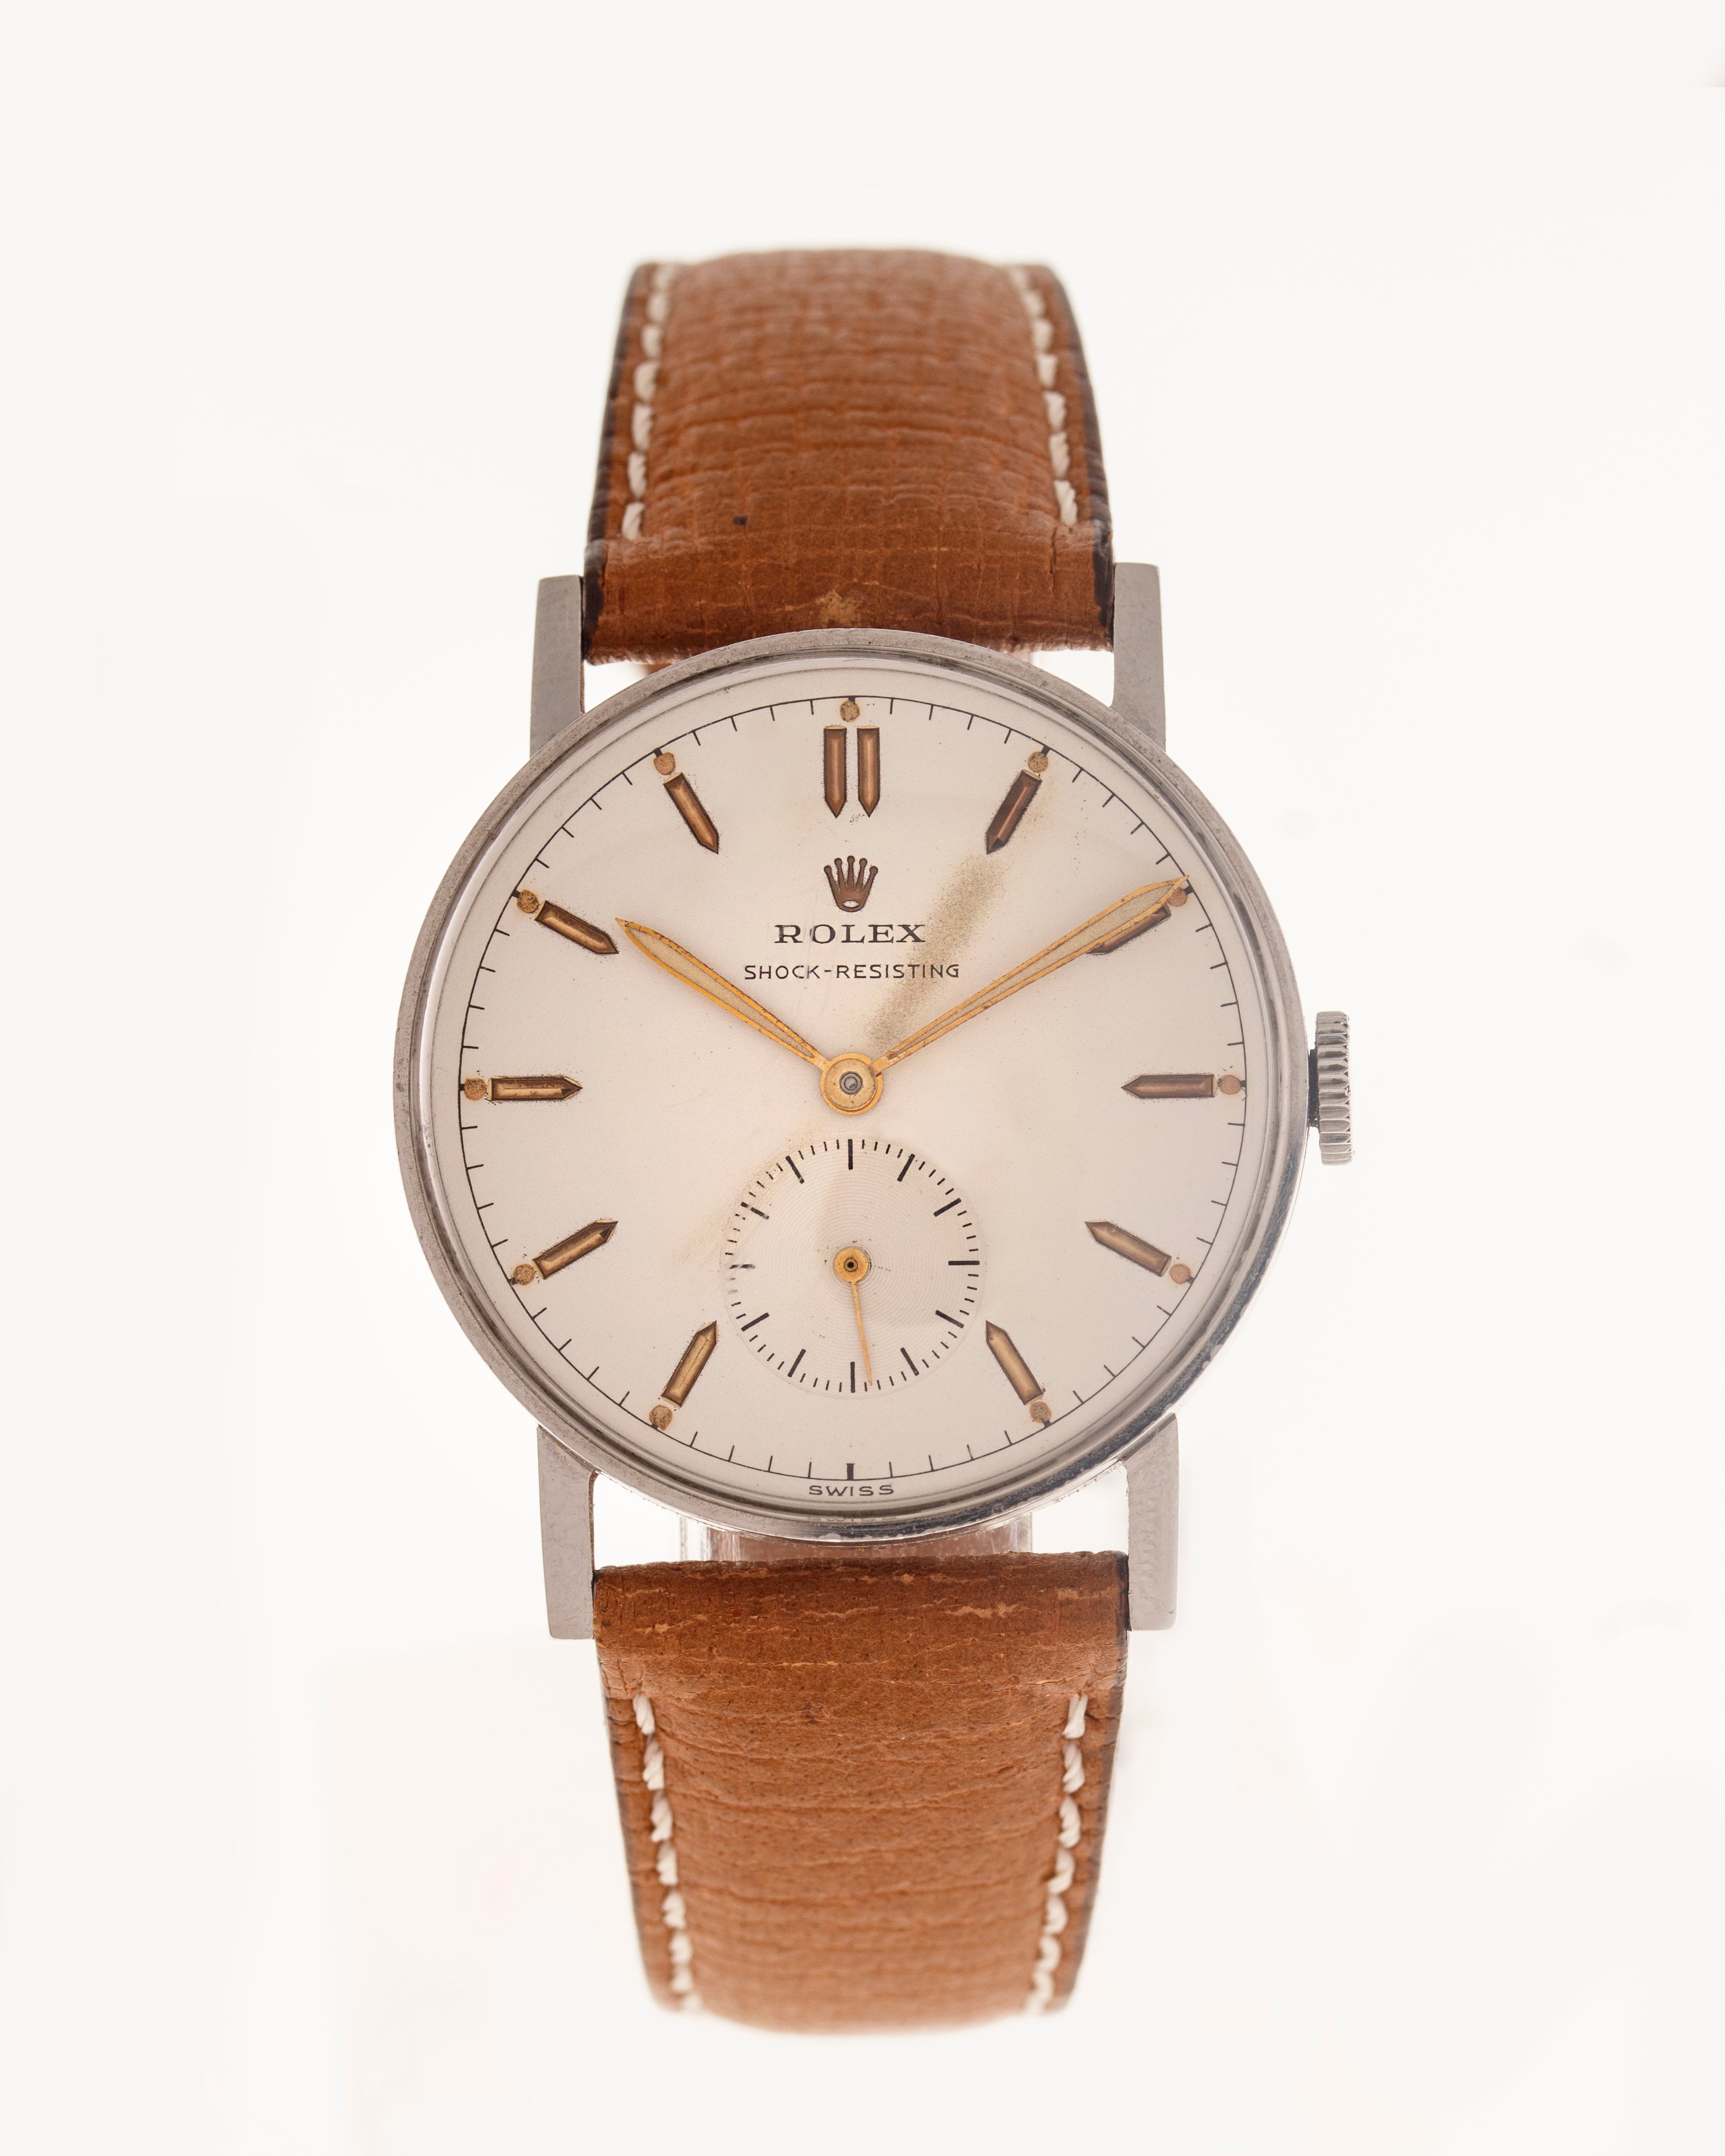 Rolex ref. 3265 A "Moneta" in stailess steel with white dial